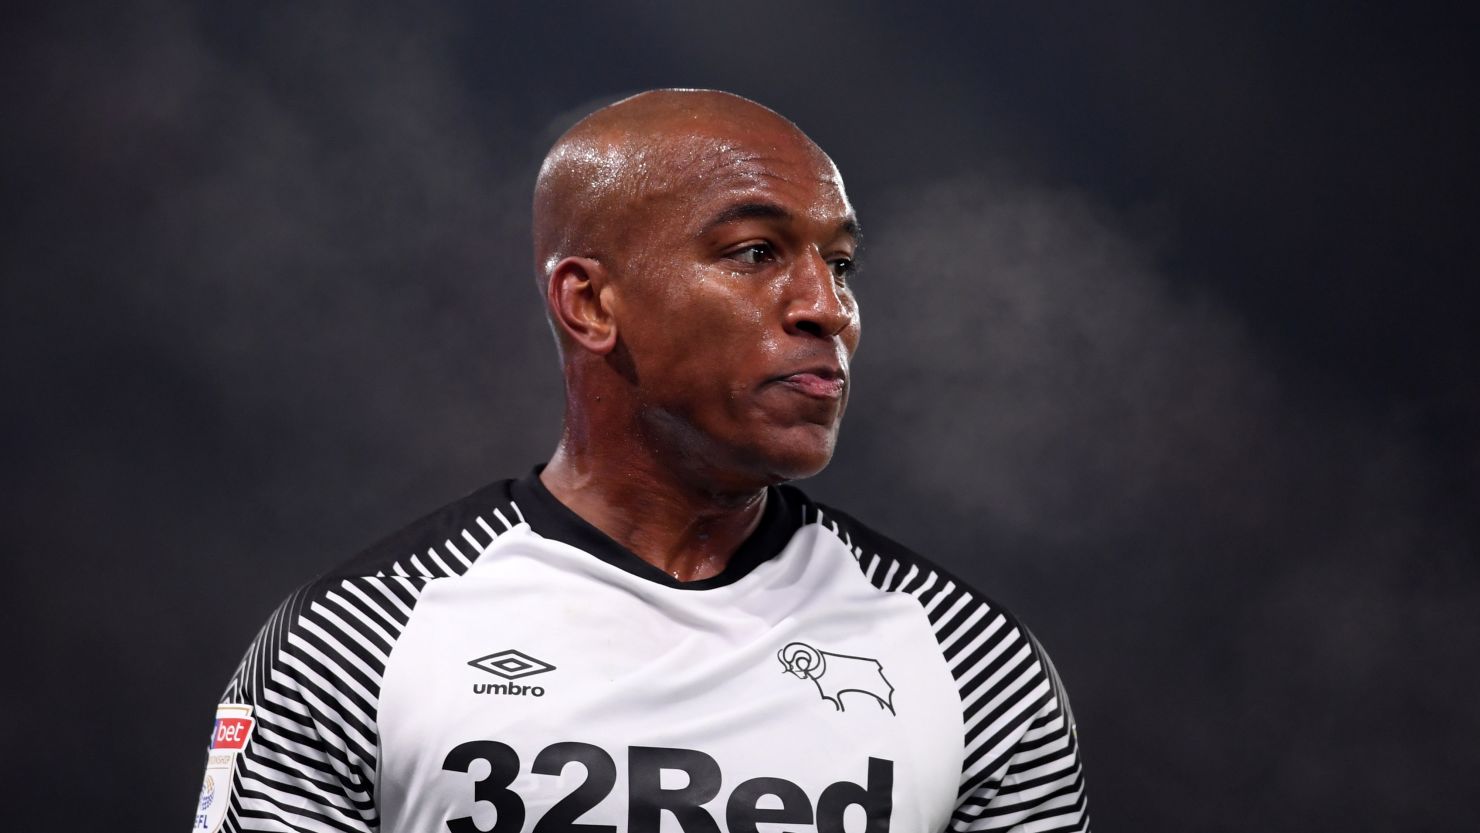 Andre Wisdom has made 20 appearances for Derby this season.